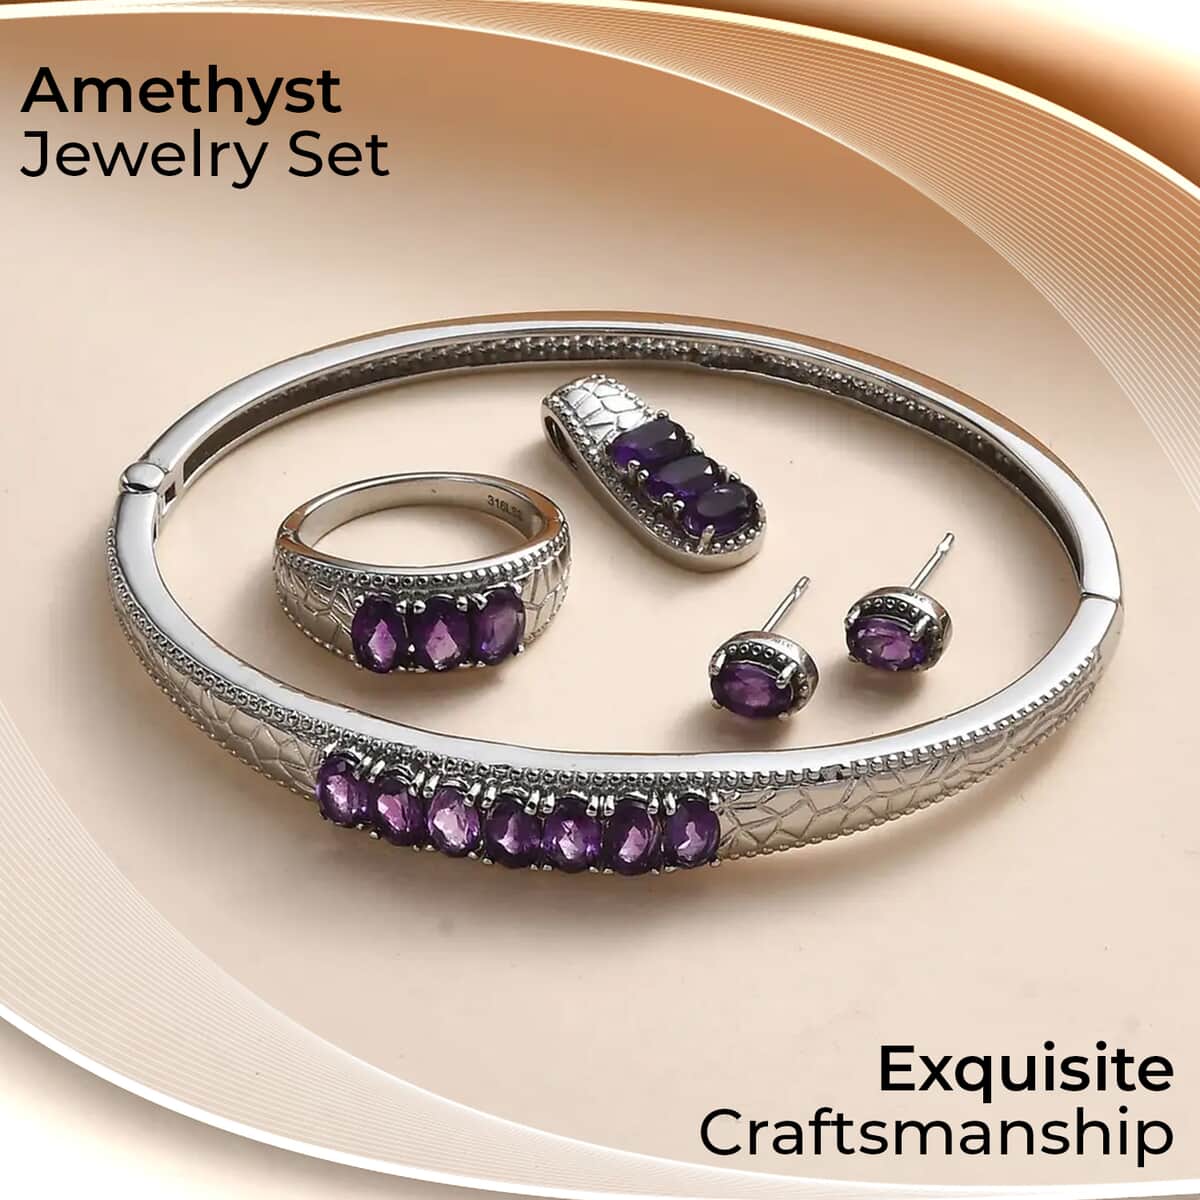 Amethyst Jewelry Set of Bangle Bracelet, 3 Stone Ring, Pendant and Stud Earrings, Stainless Steel Jewelry Set, Gifts For Her 6.25 ctw image number 1